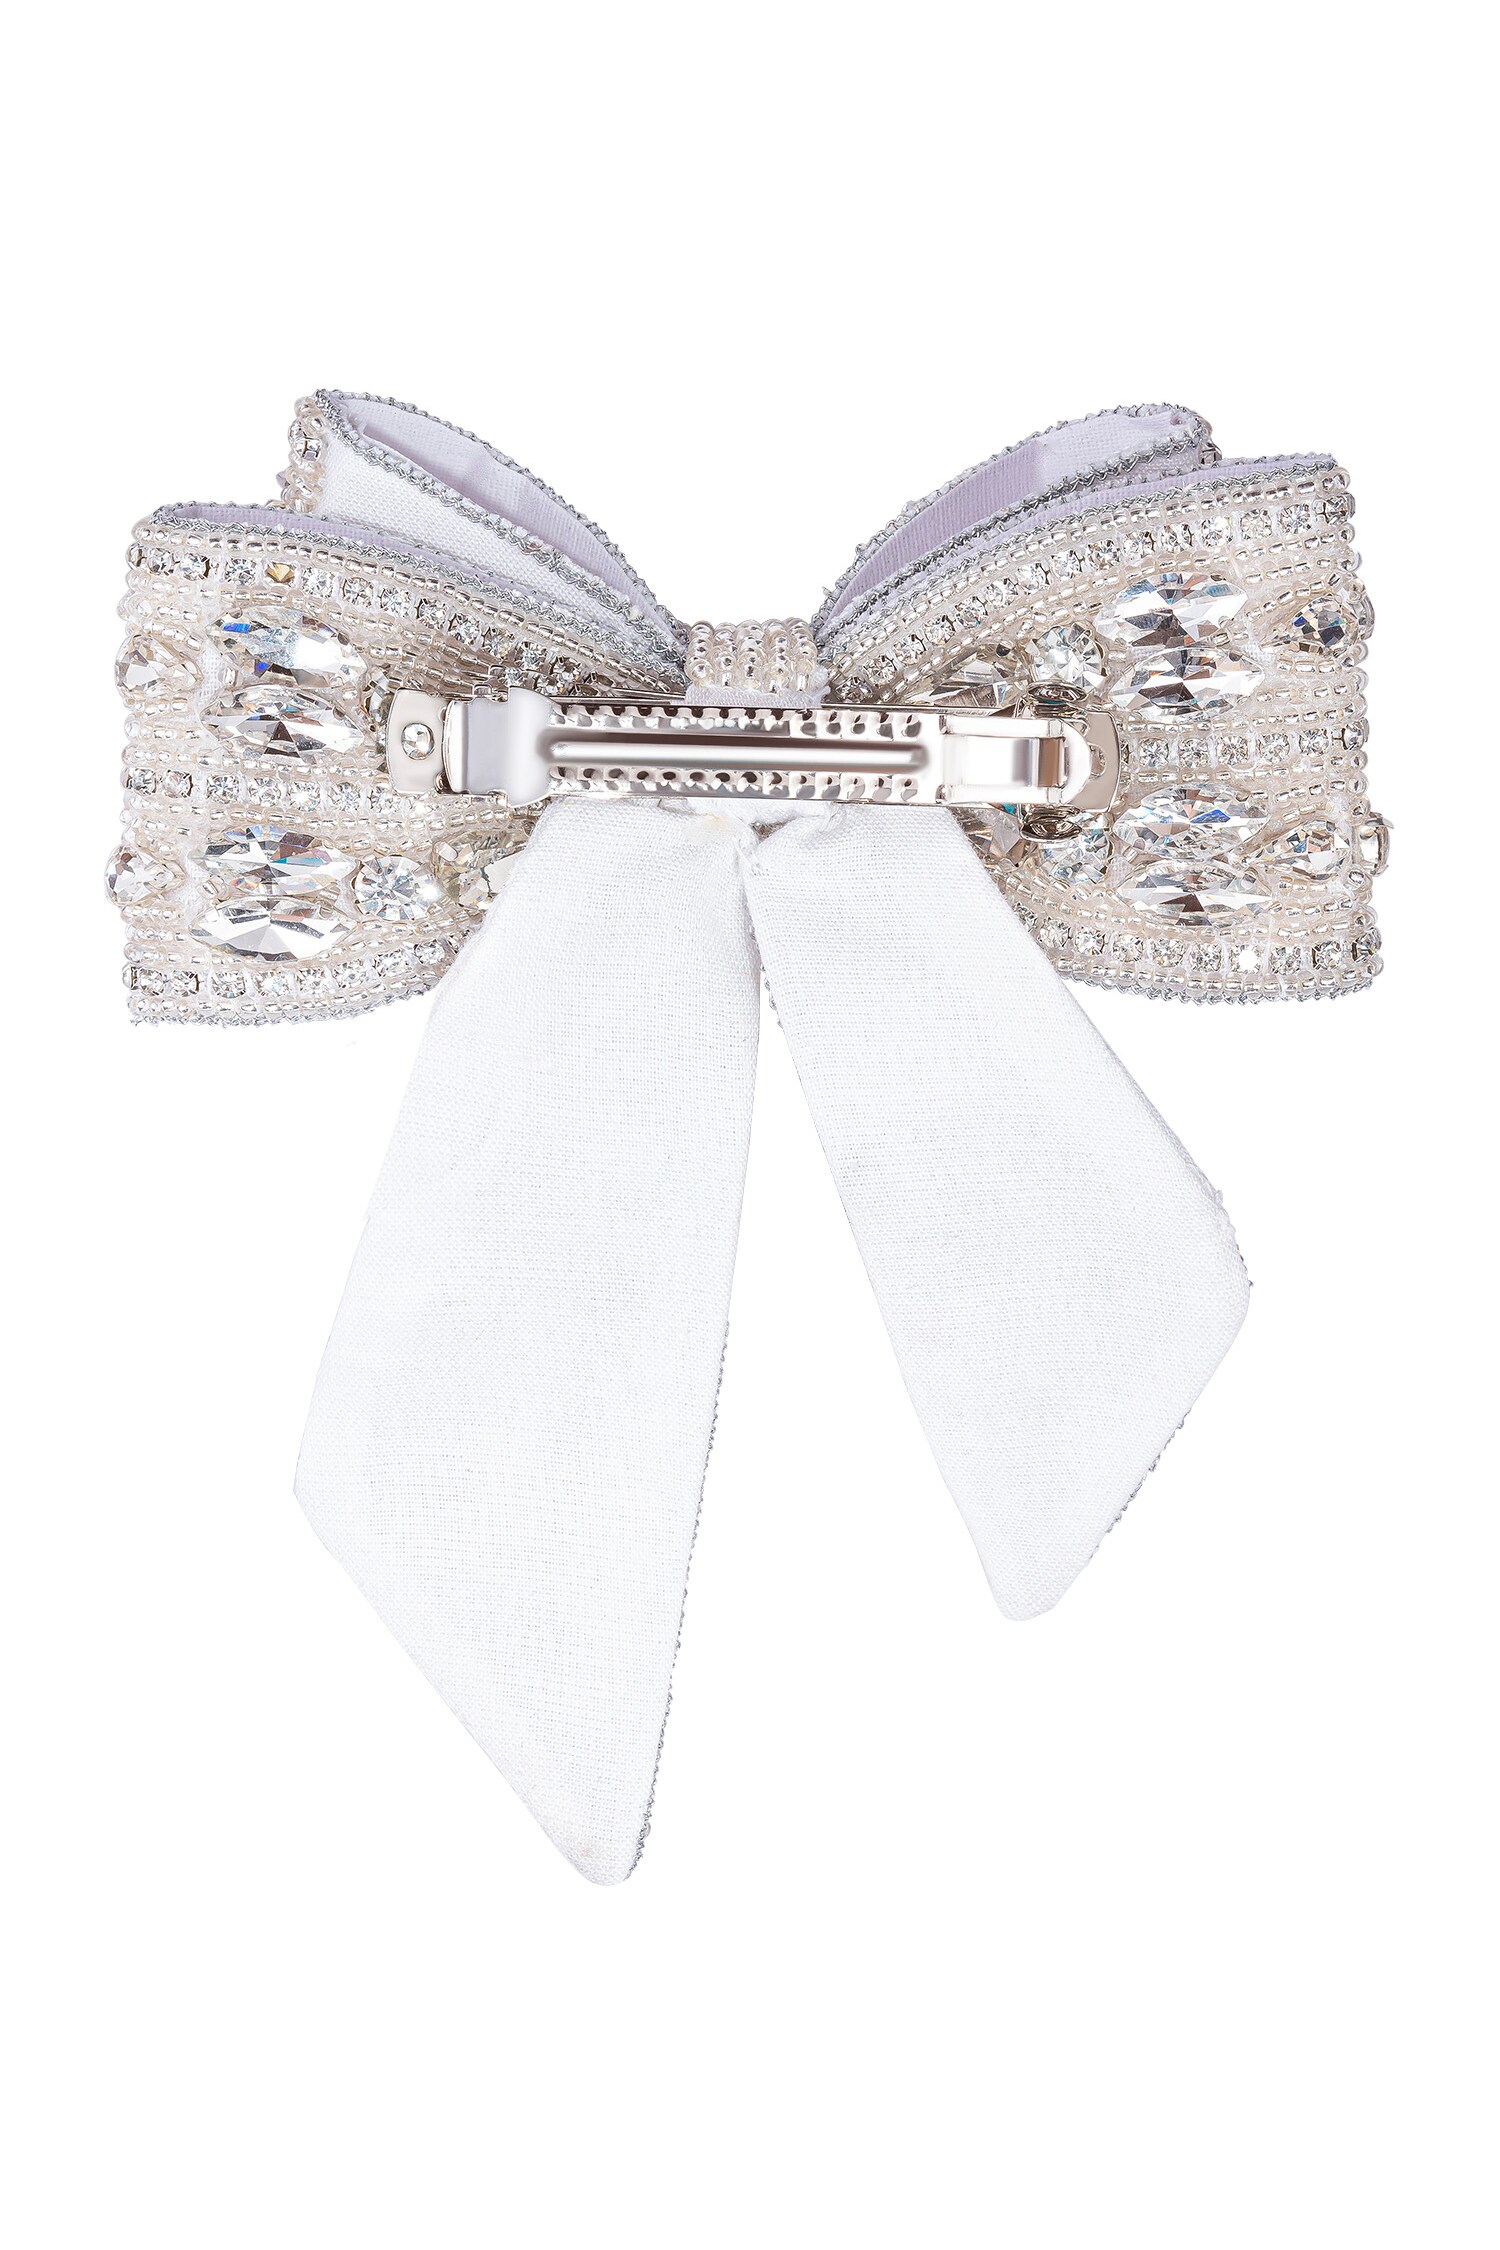 Solar Eclipse Embellished Hair Bow Barrette Clip | Hand-Stitched White